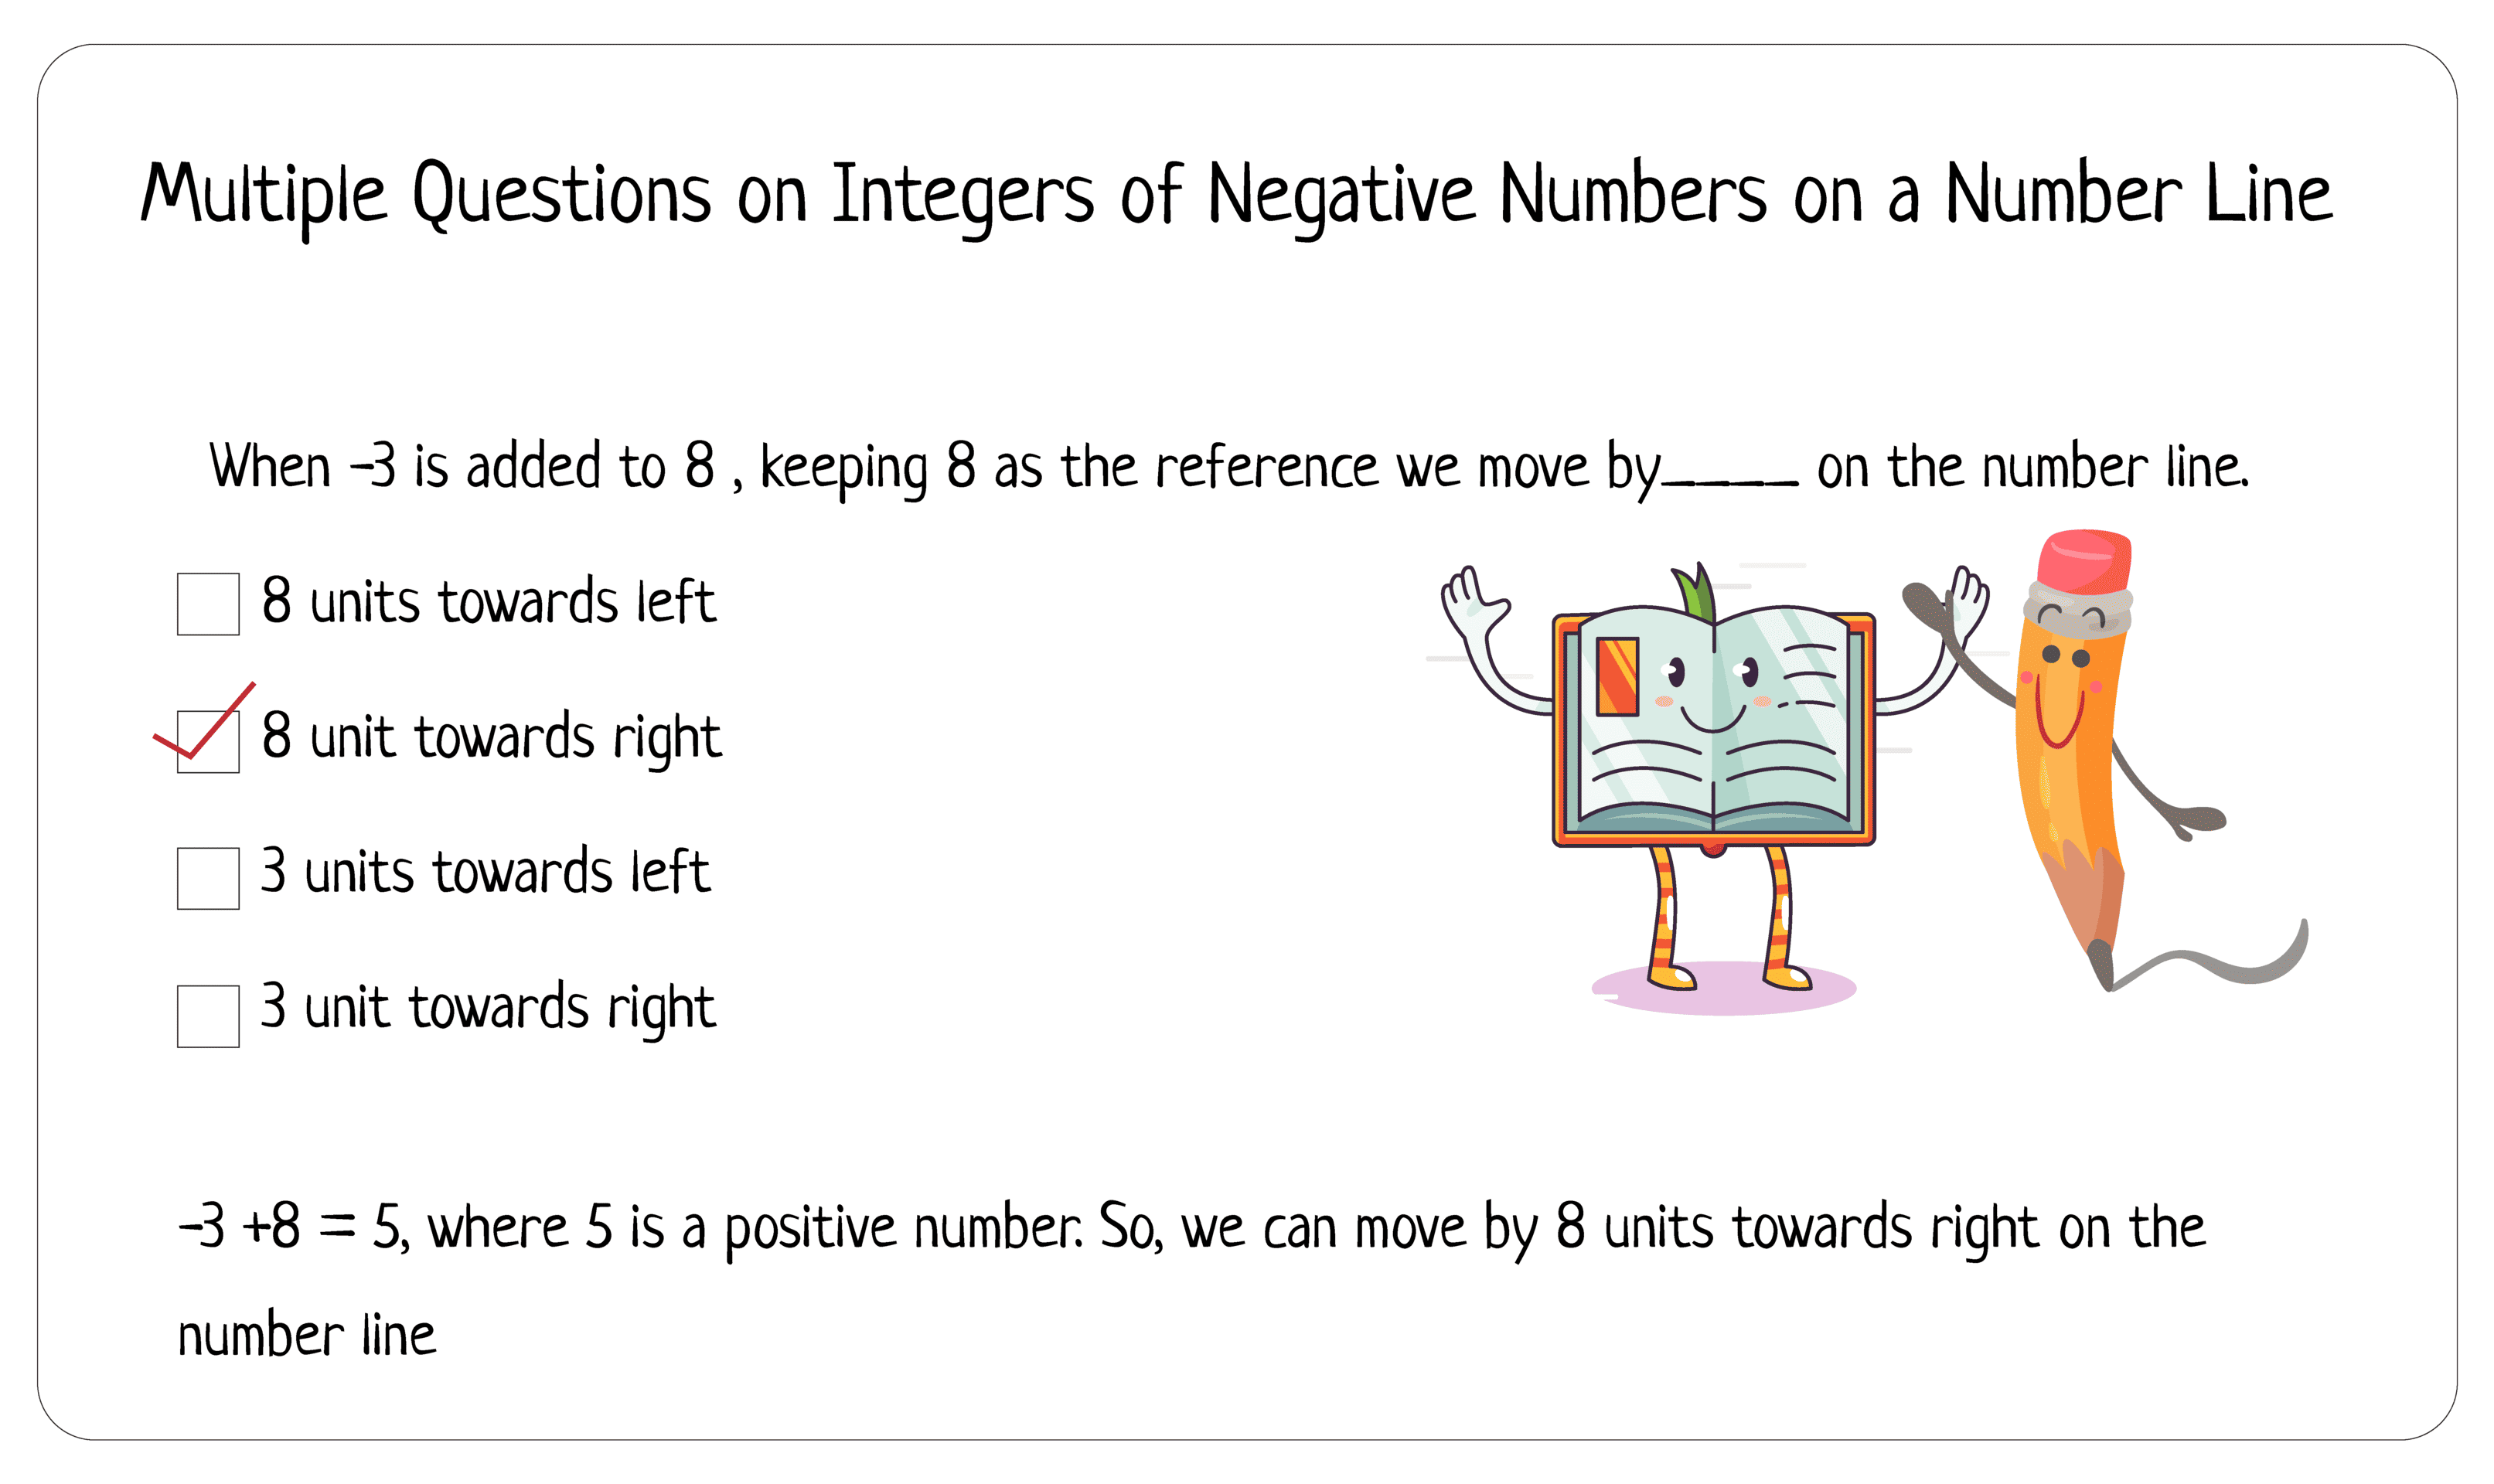 Steps of plotting negative numbers on a number line (6)